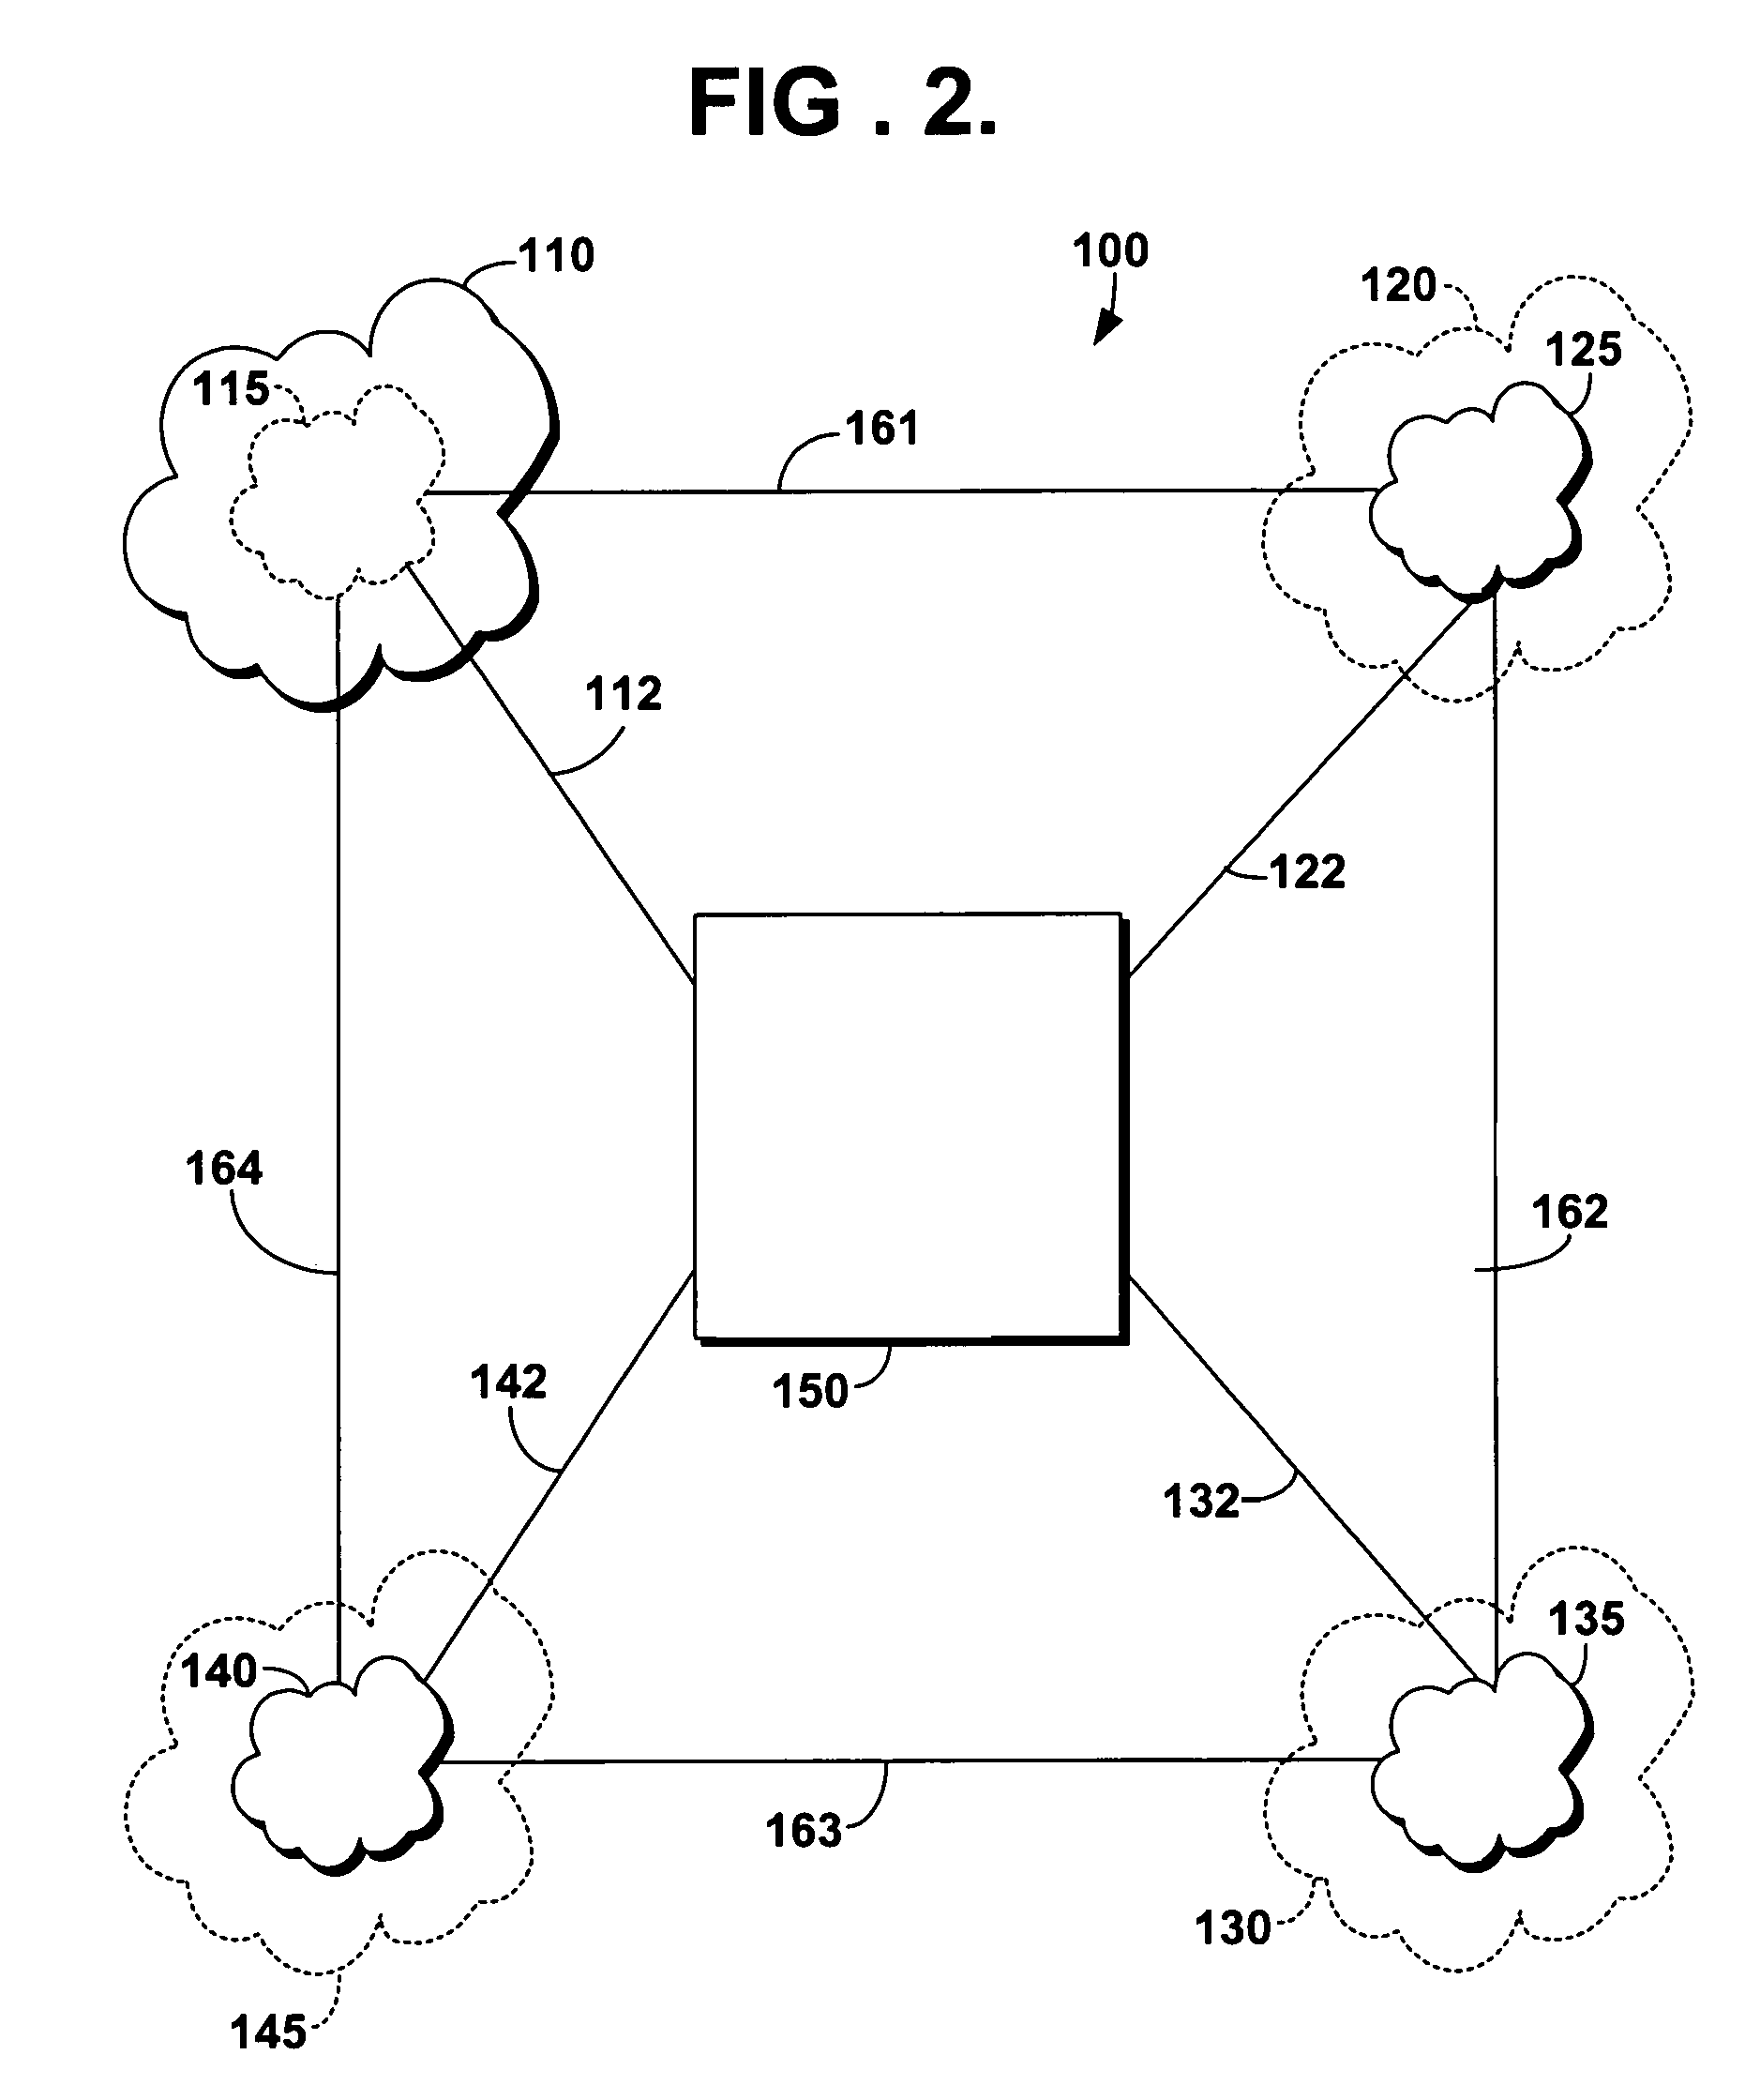 Interface system for carrier virtual network system